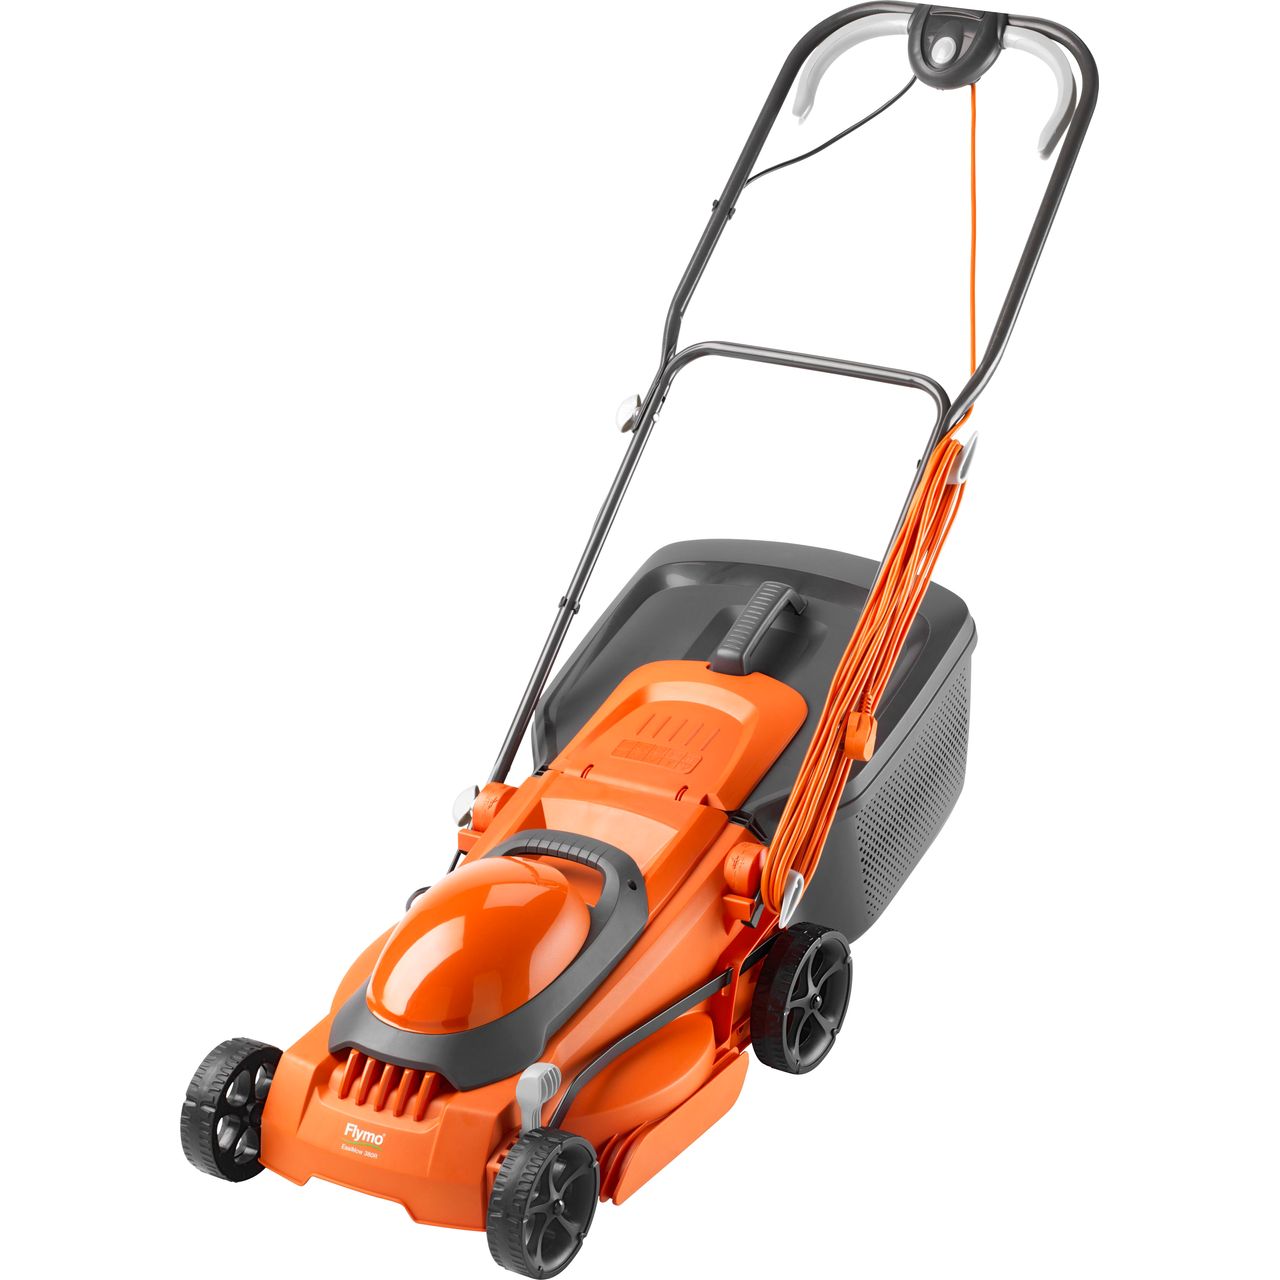 Flymo EasiMow 380R Electric Lawnmower Review